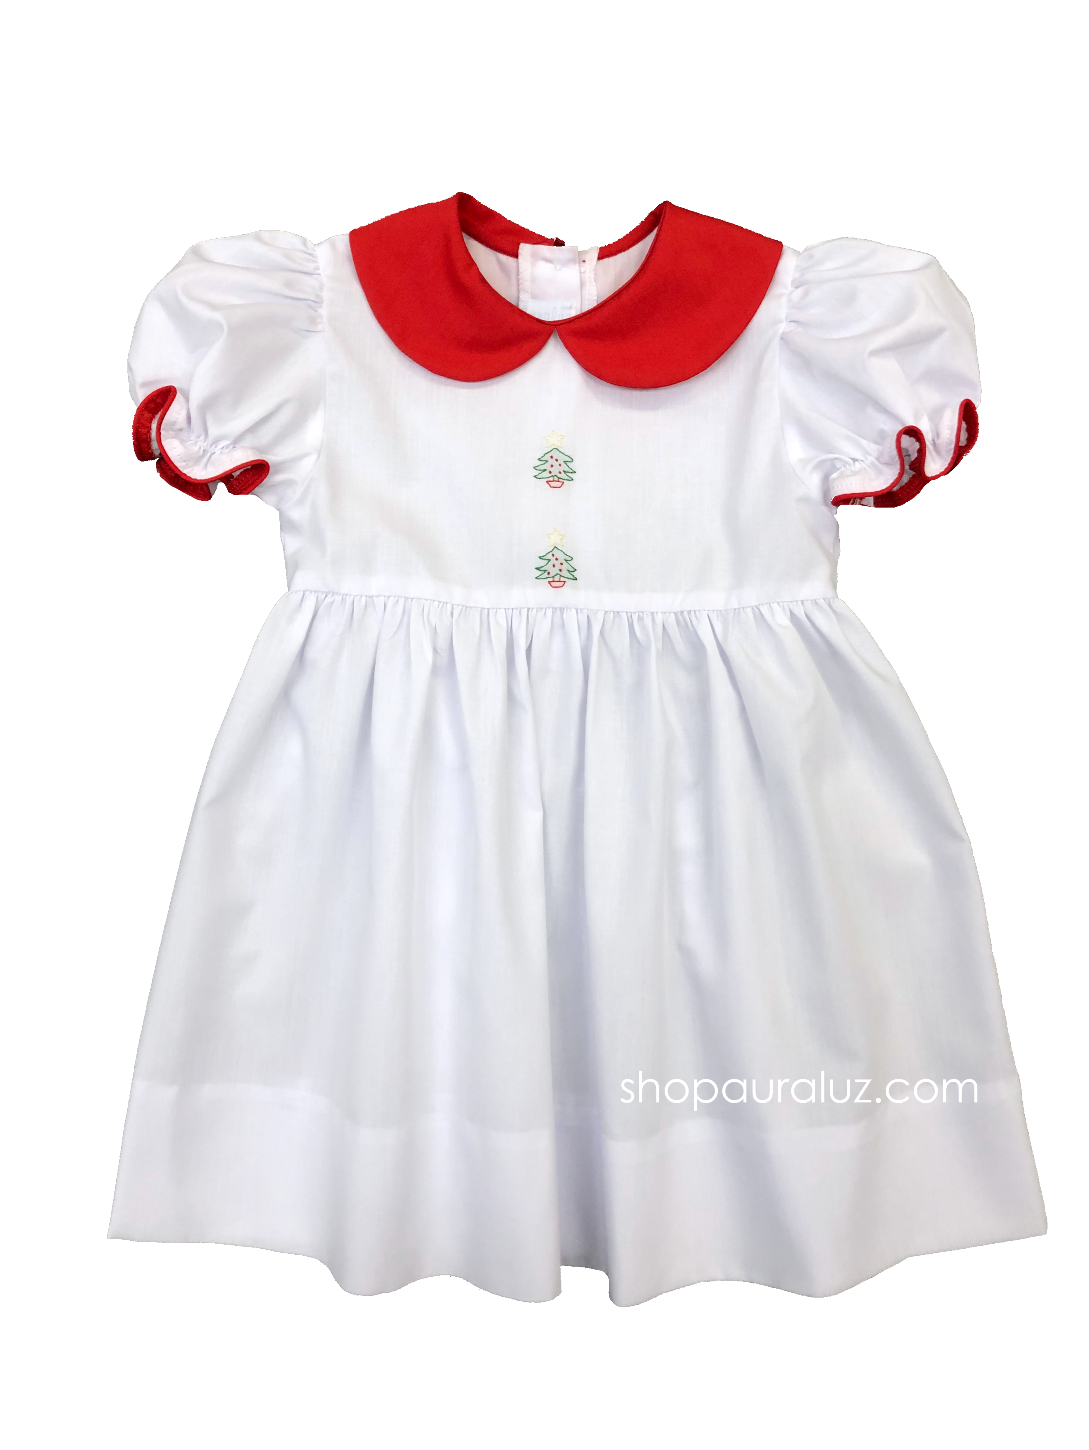 Auraluz Christmas Dress. White with red p.p. collar and embroidered trees